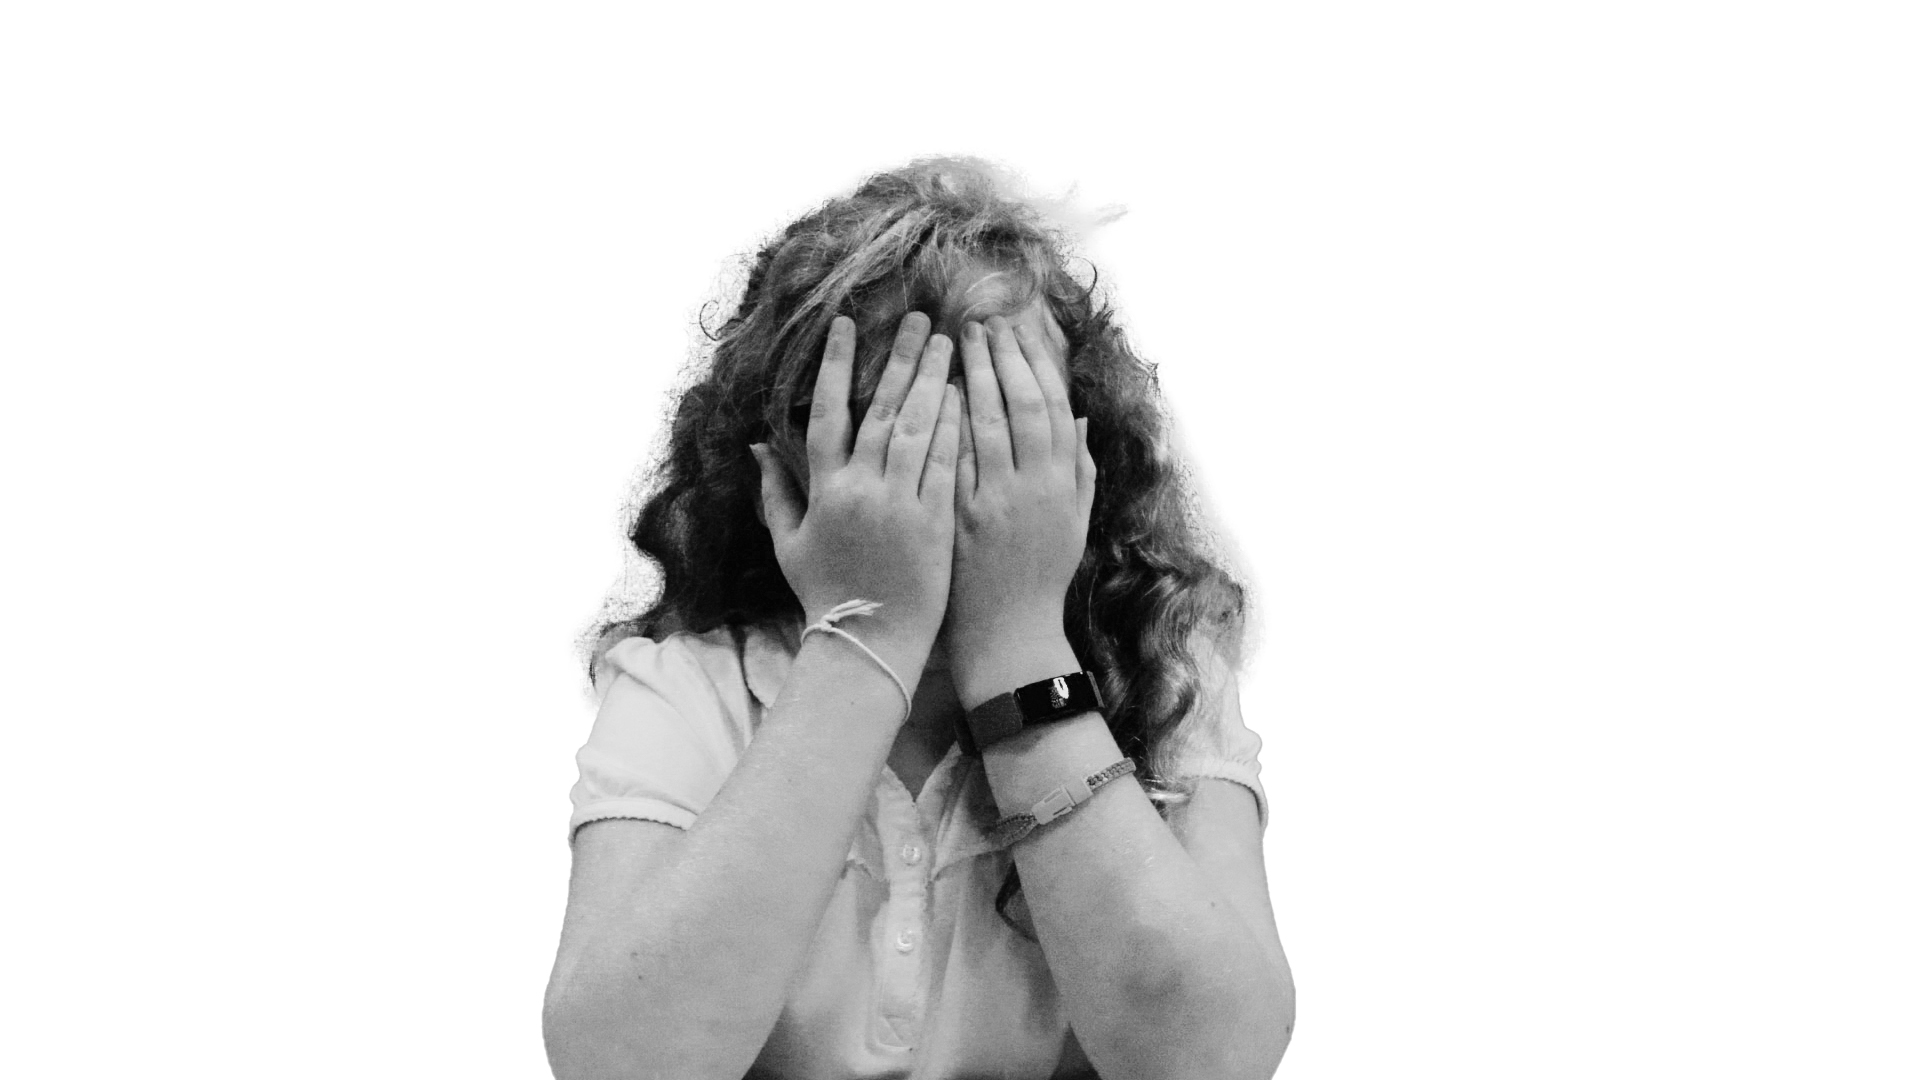 Monotone image of child, covering her face with her hands